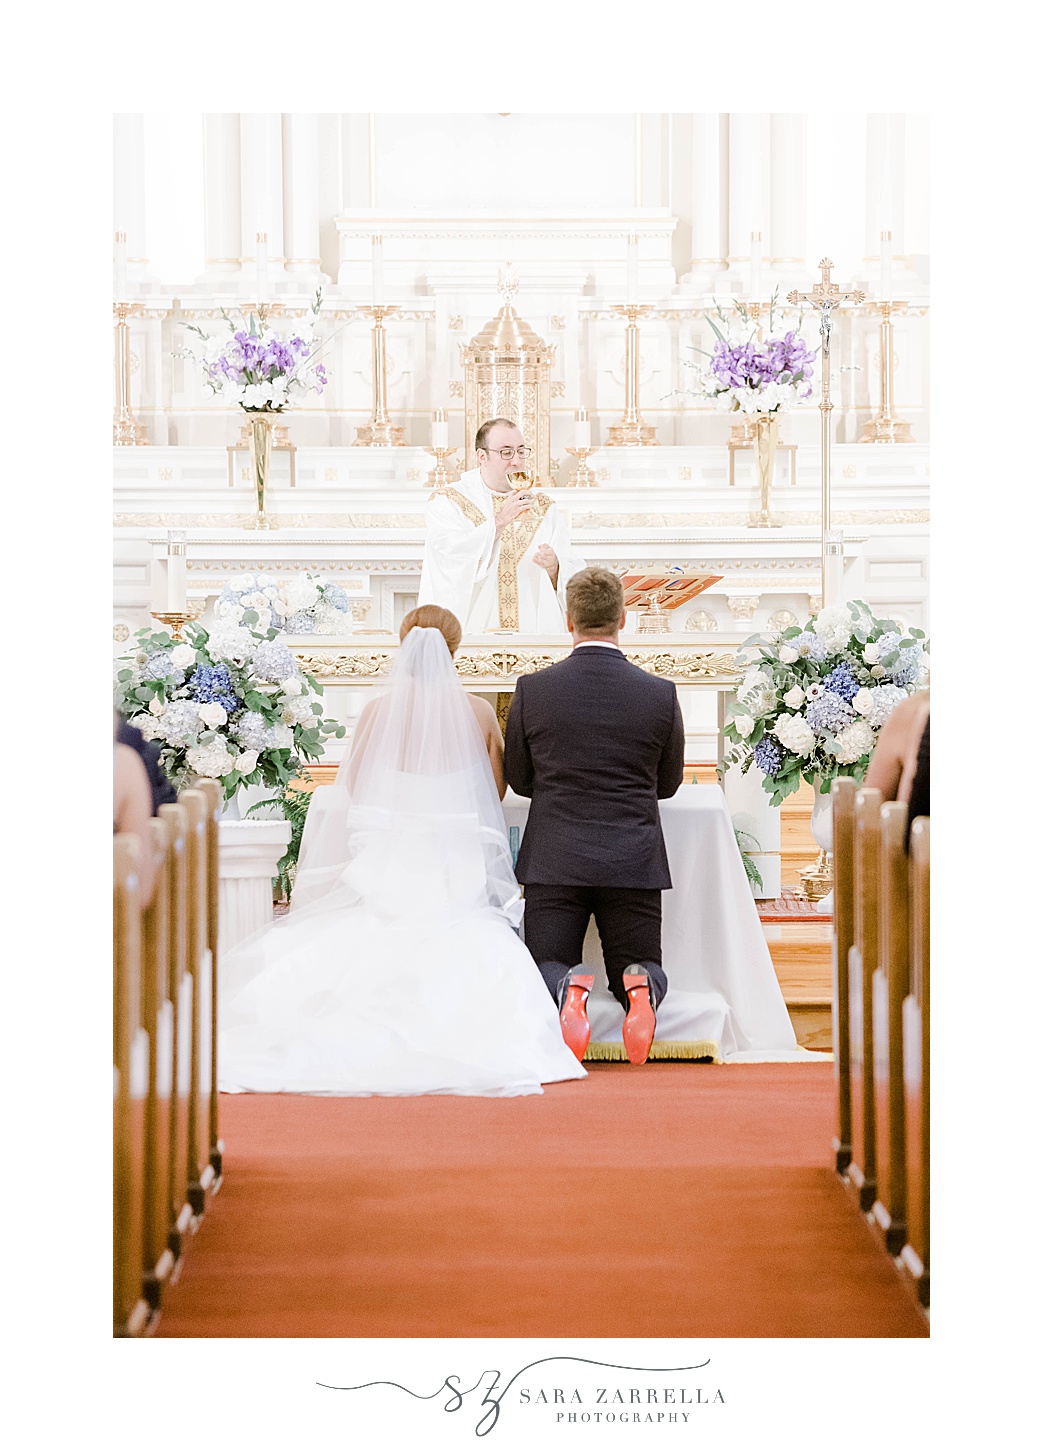 newlyweds kneel at alter during traditional church wedding in Rhode Island